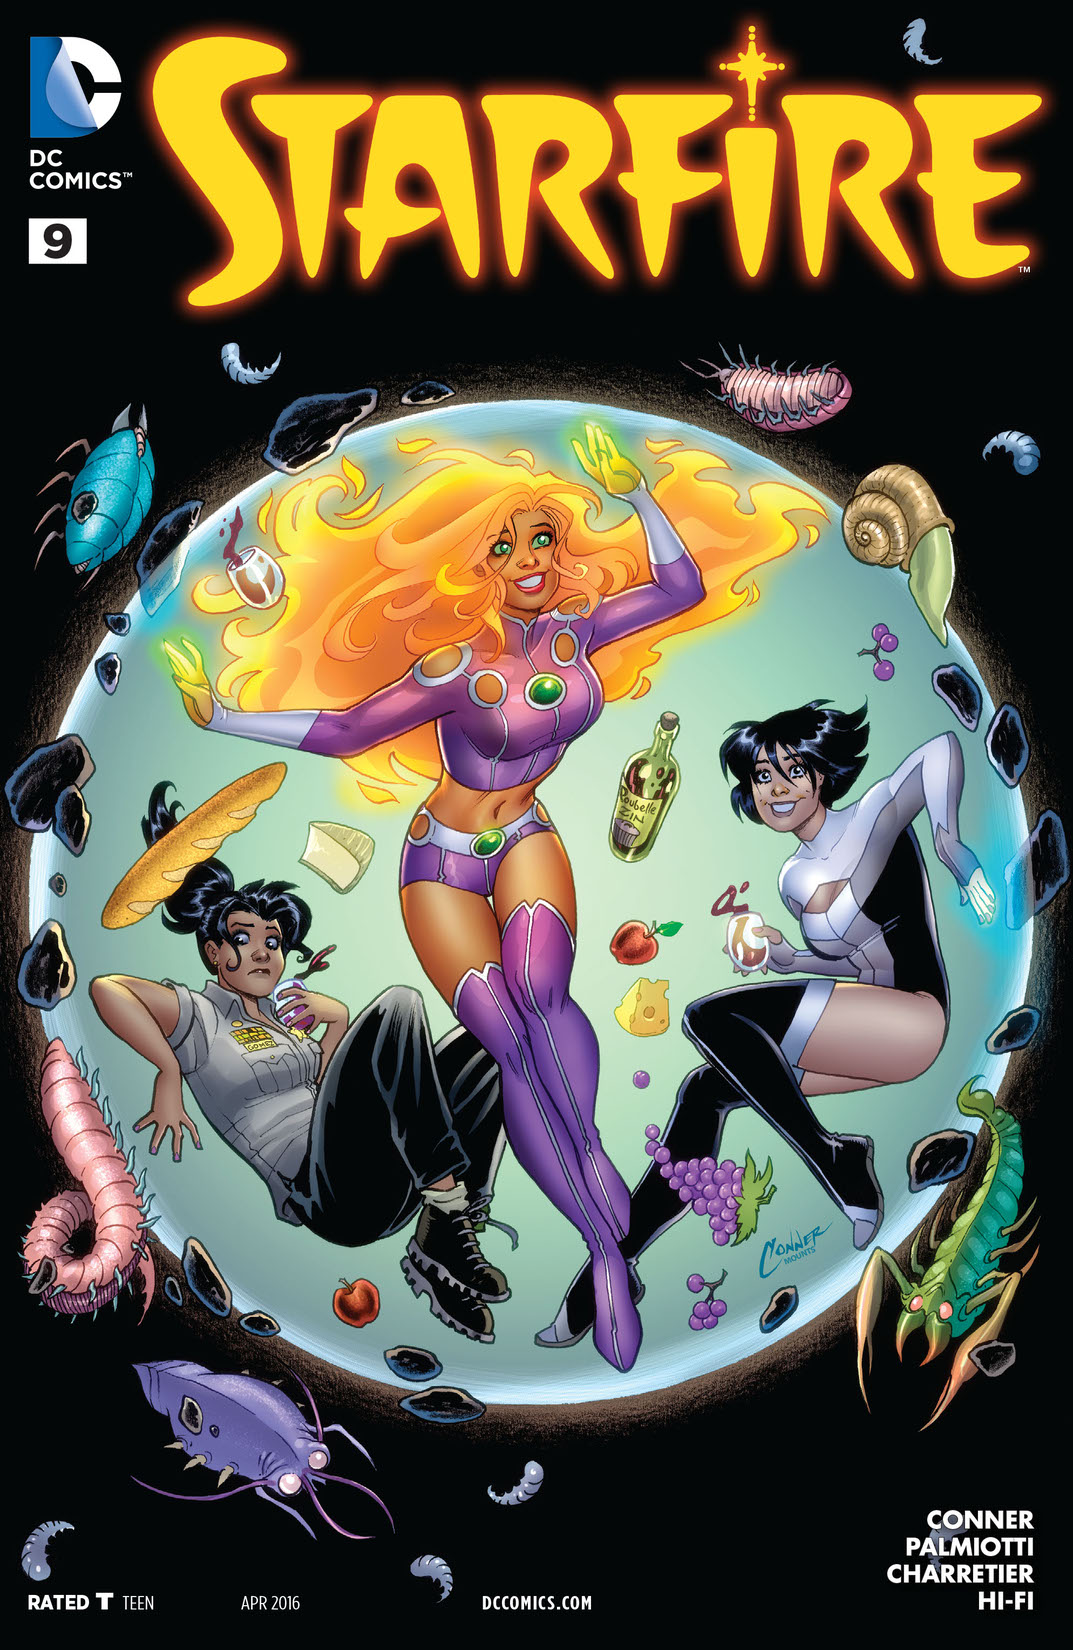 Starfire #9 preview images